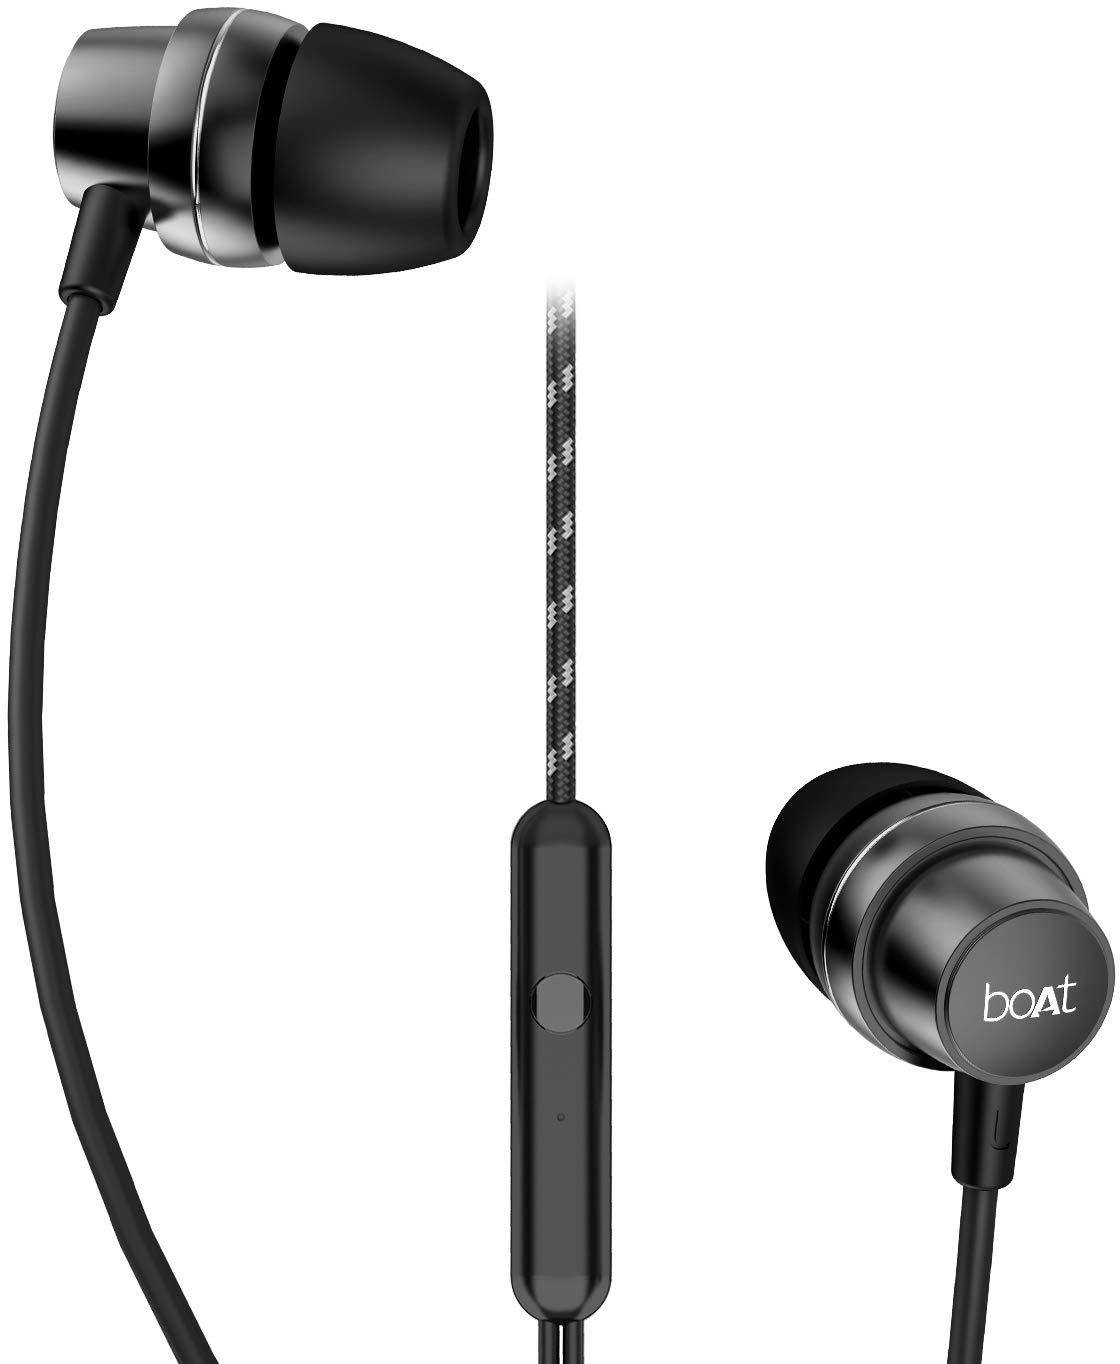 boAt BassHeads 182 HD Sound Wired Earphones zoom image